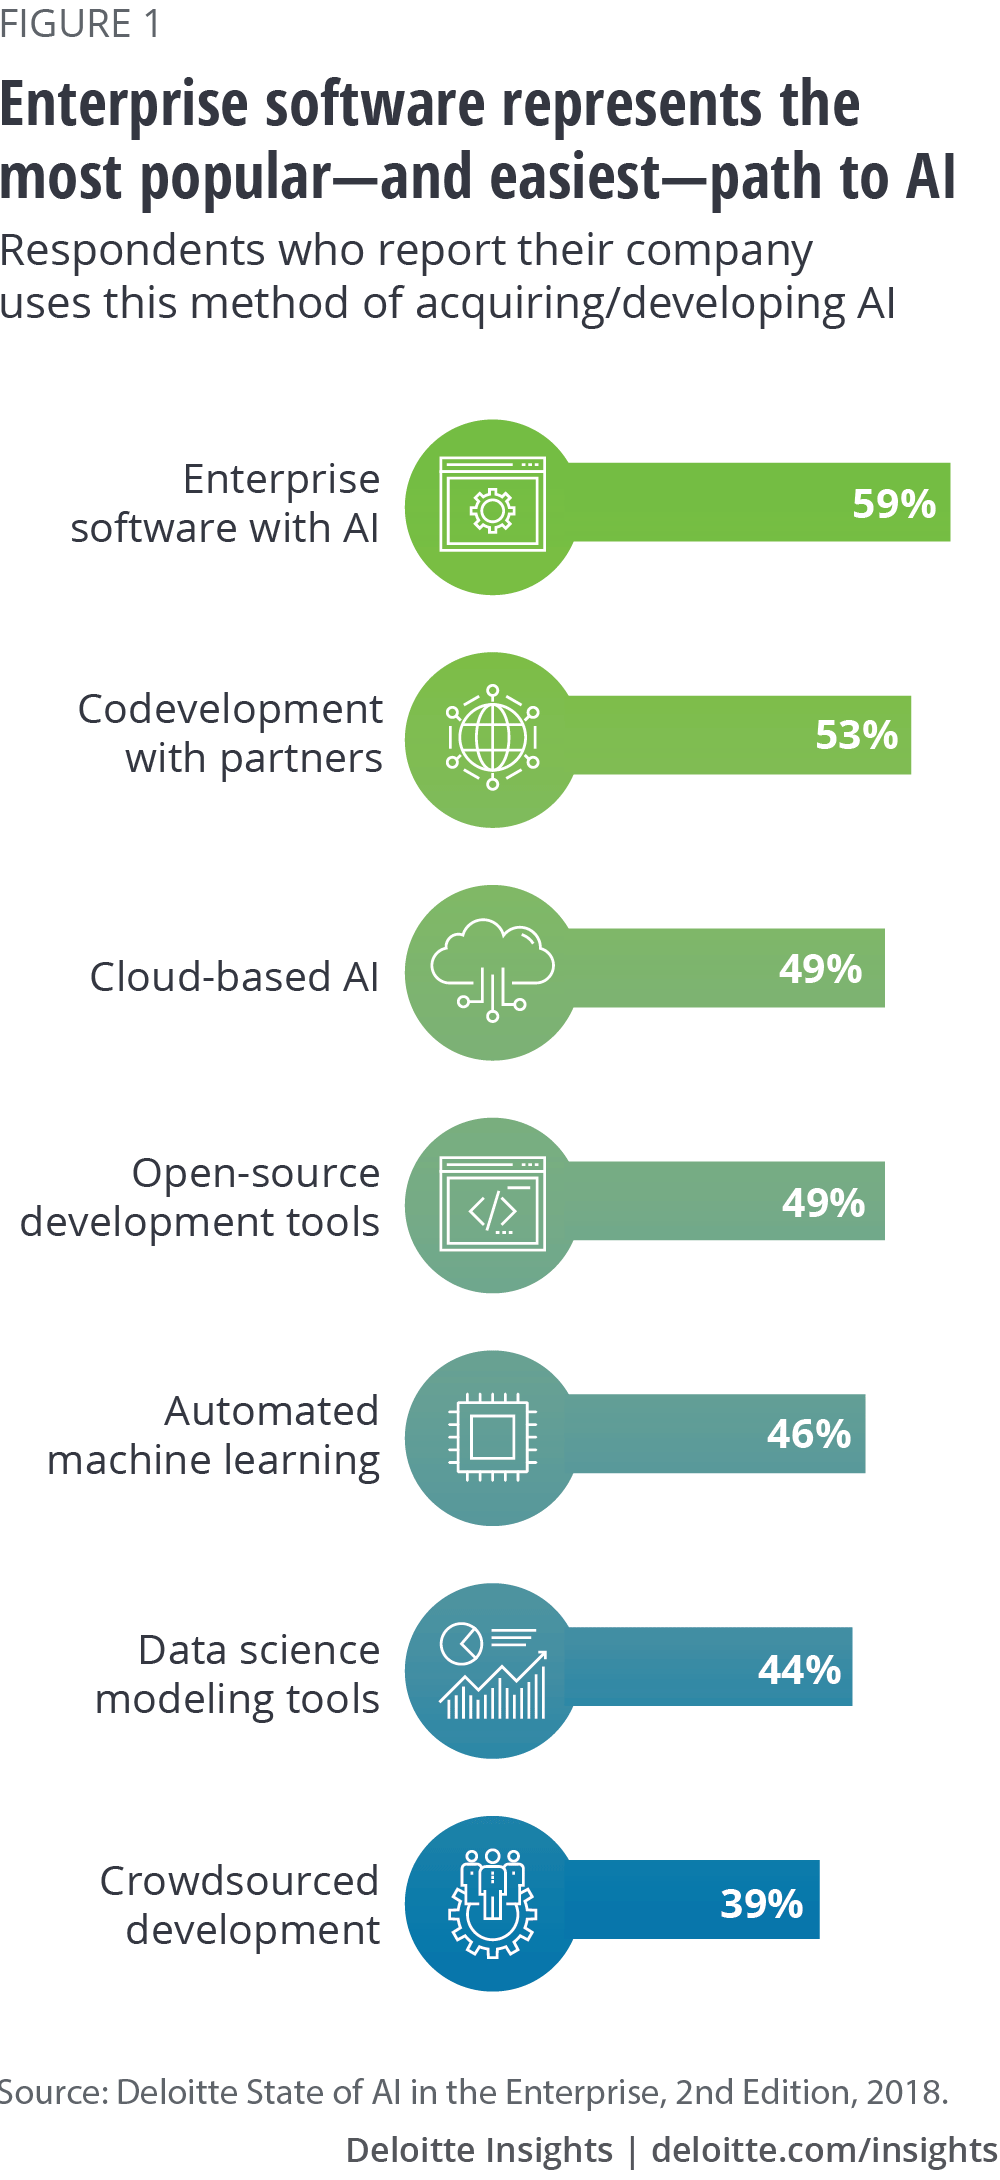 Figure 1. Enterprise software represents the most popular—and easiest—path to AI